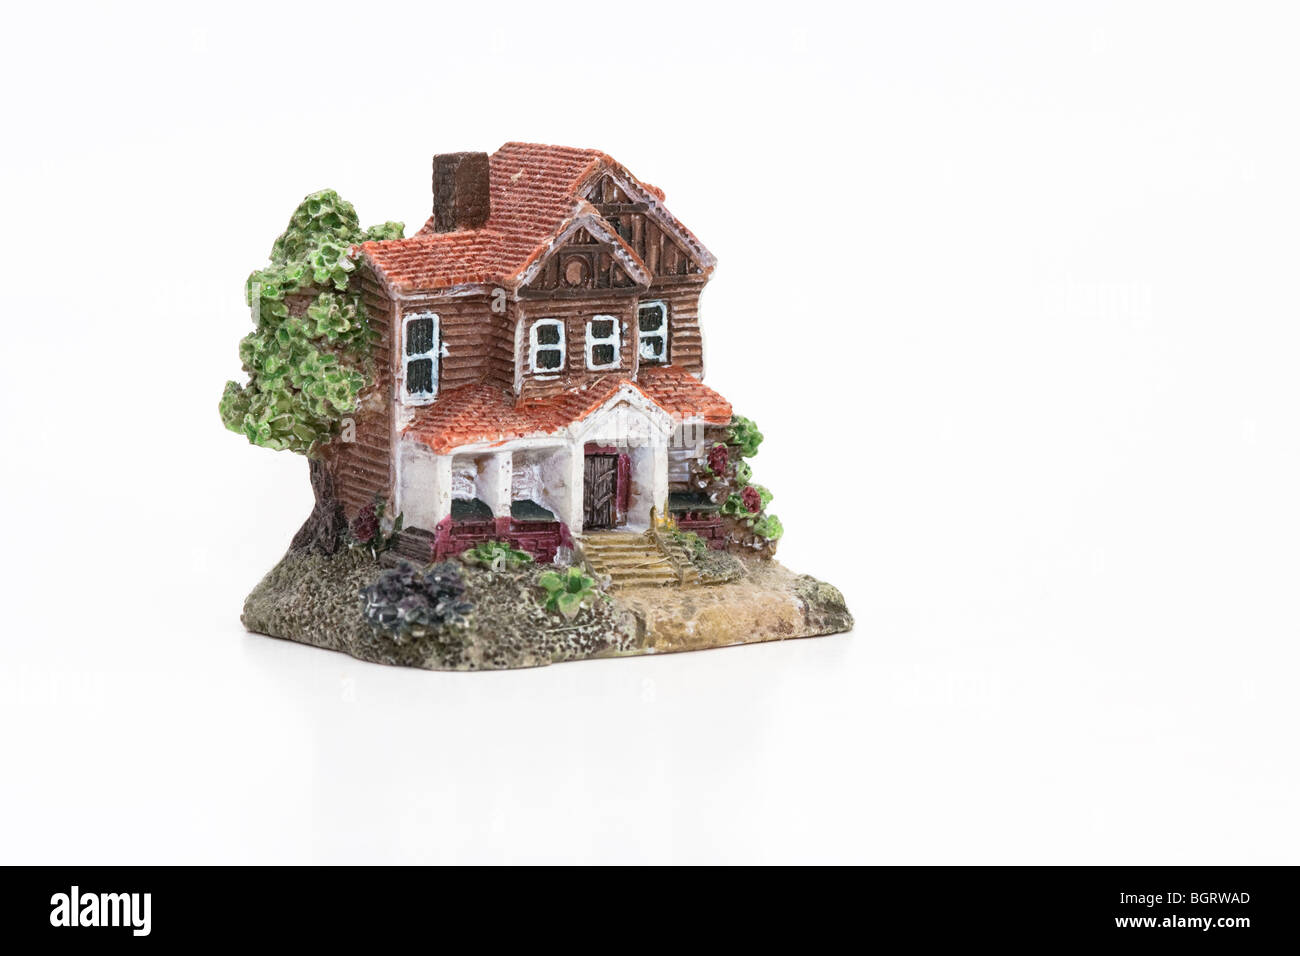 house miniature model vacation concept Stock Photo